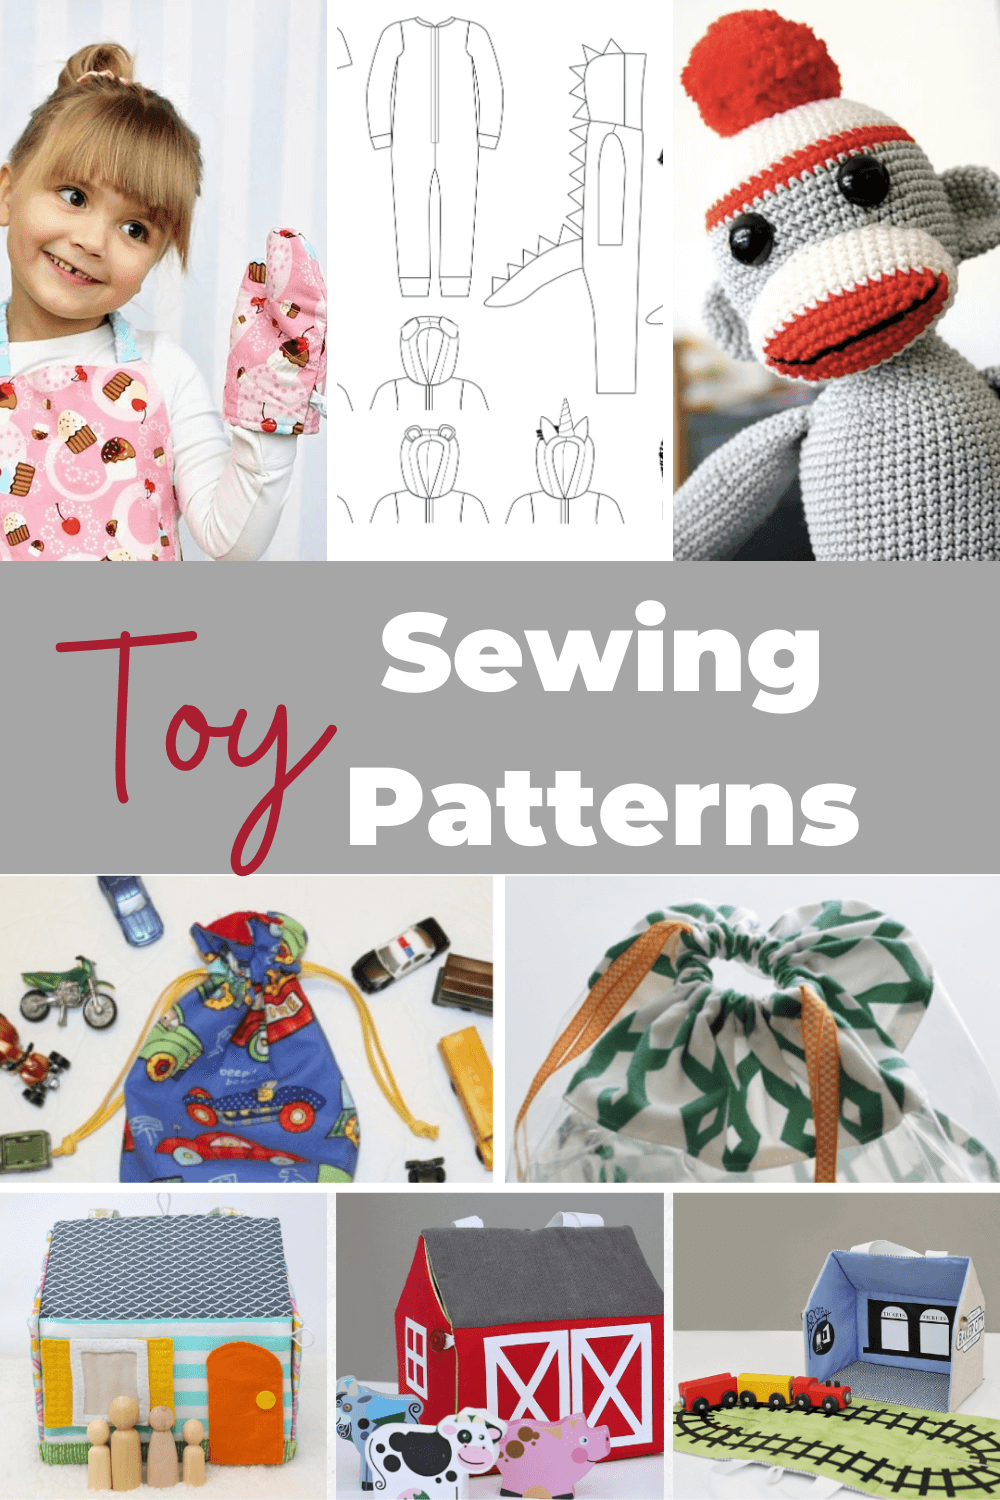 8 Top Toy Sewing Patterns | Baby Toy Patterns